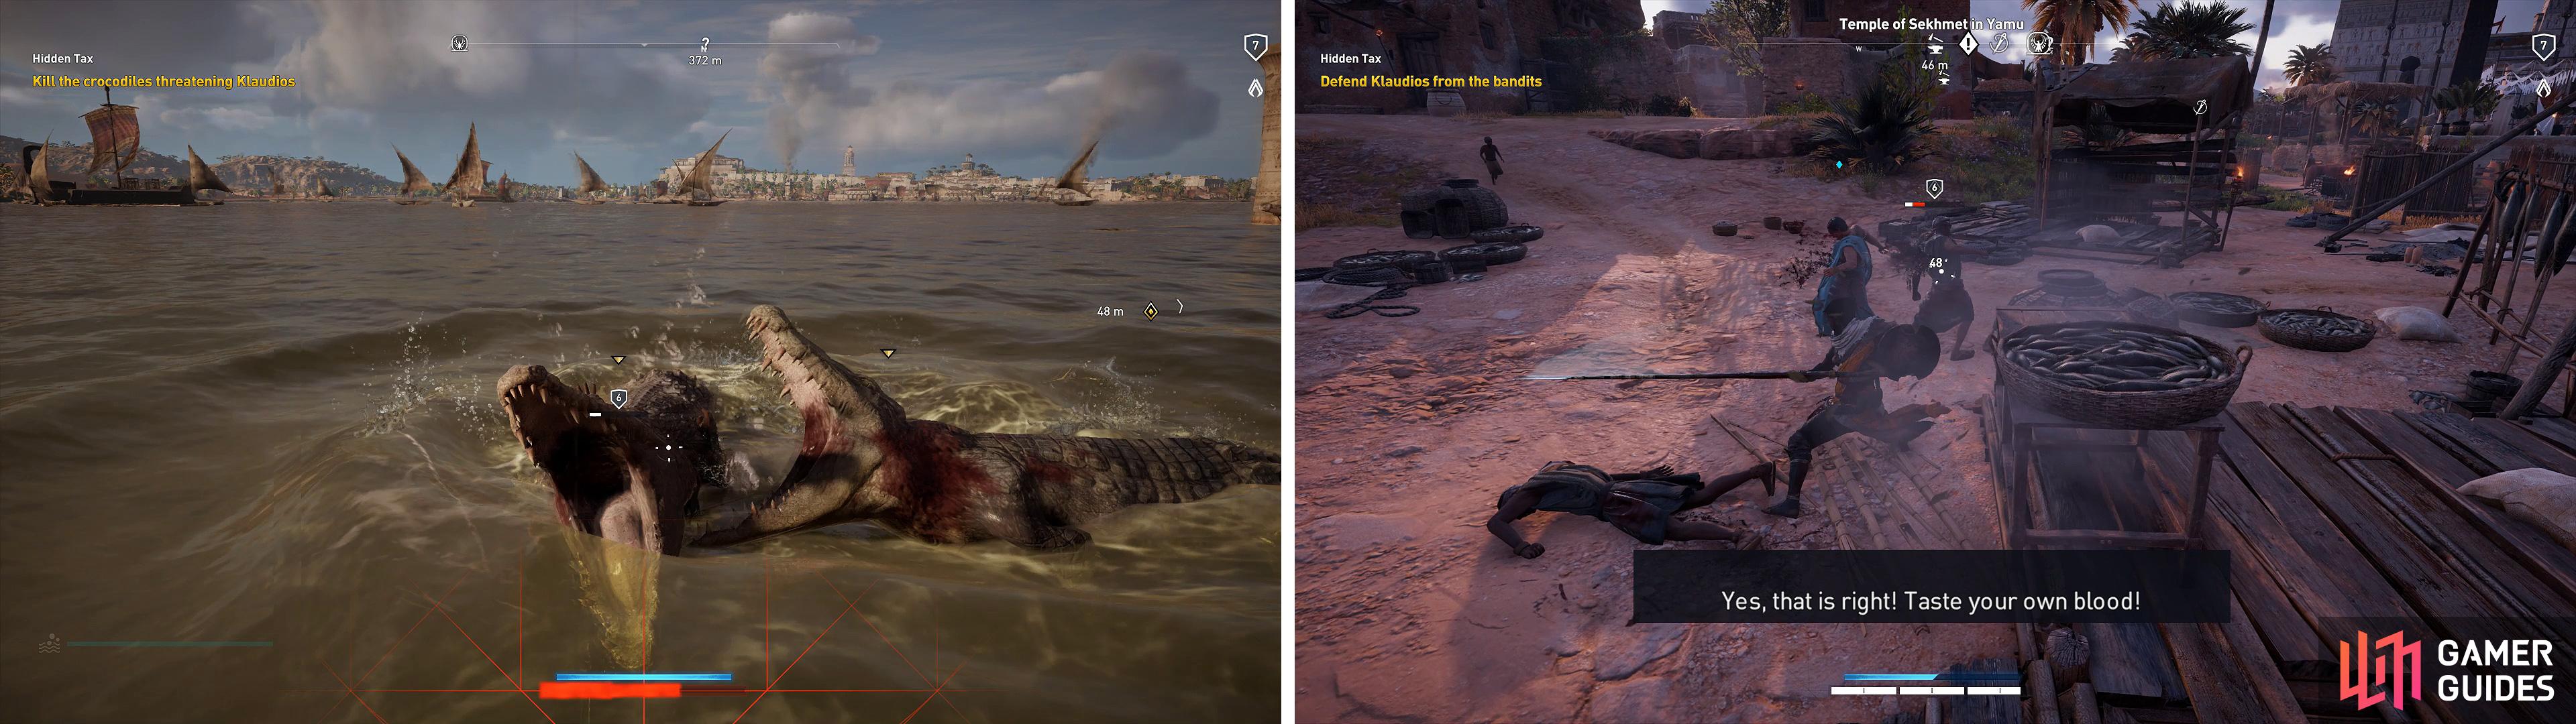 It’s not a good idea to fight the crocodiles up close (left). When you get back, you must fight off some soldiers (right) to complete the mission.